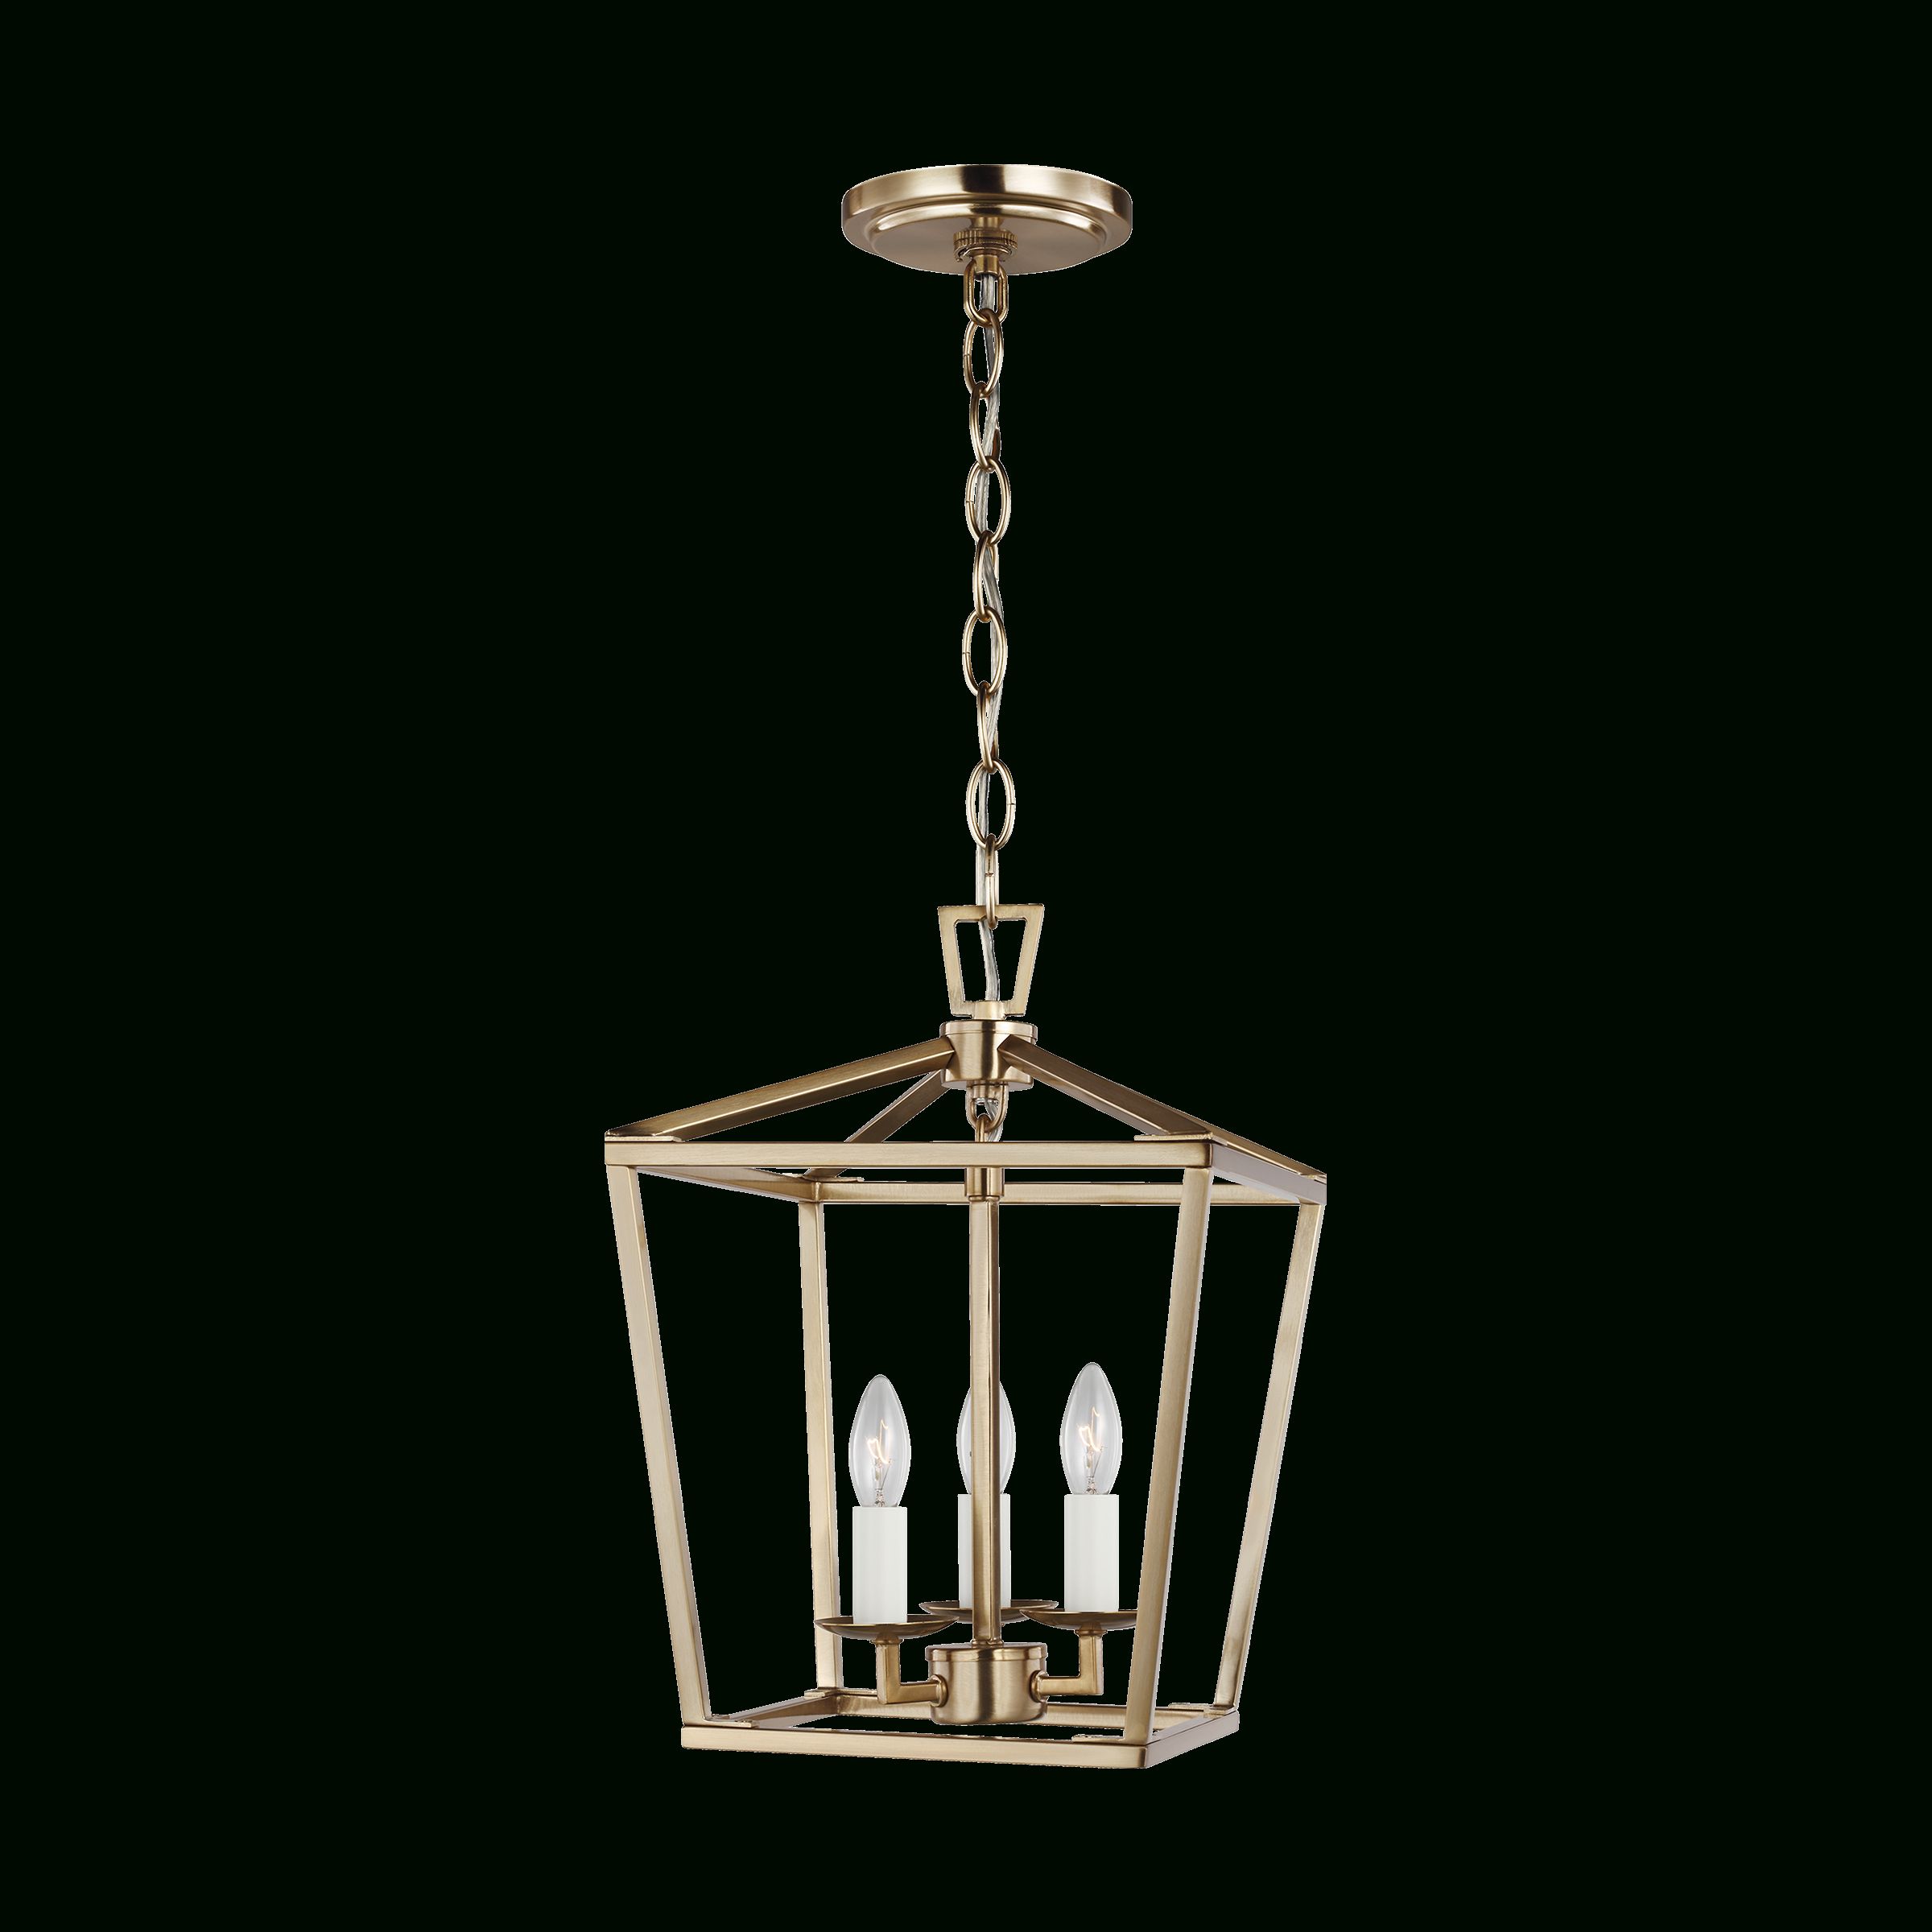 Brass Lantern Pendant Lighting At Lowes Within Brass Lantern Chandeliers (View 13 of 15)